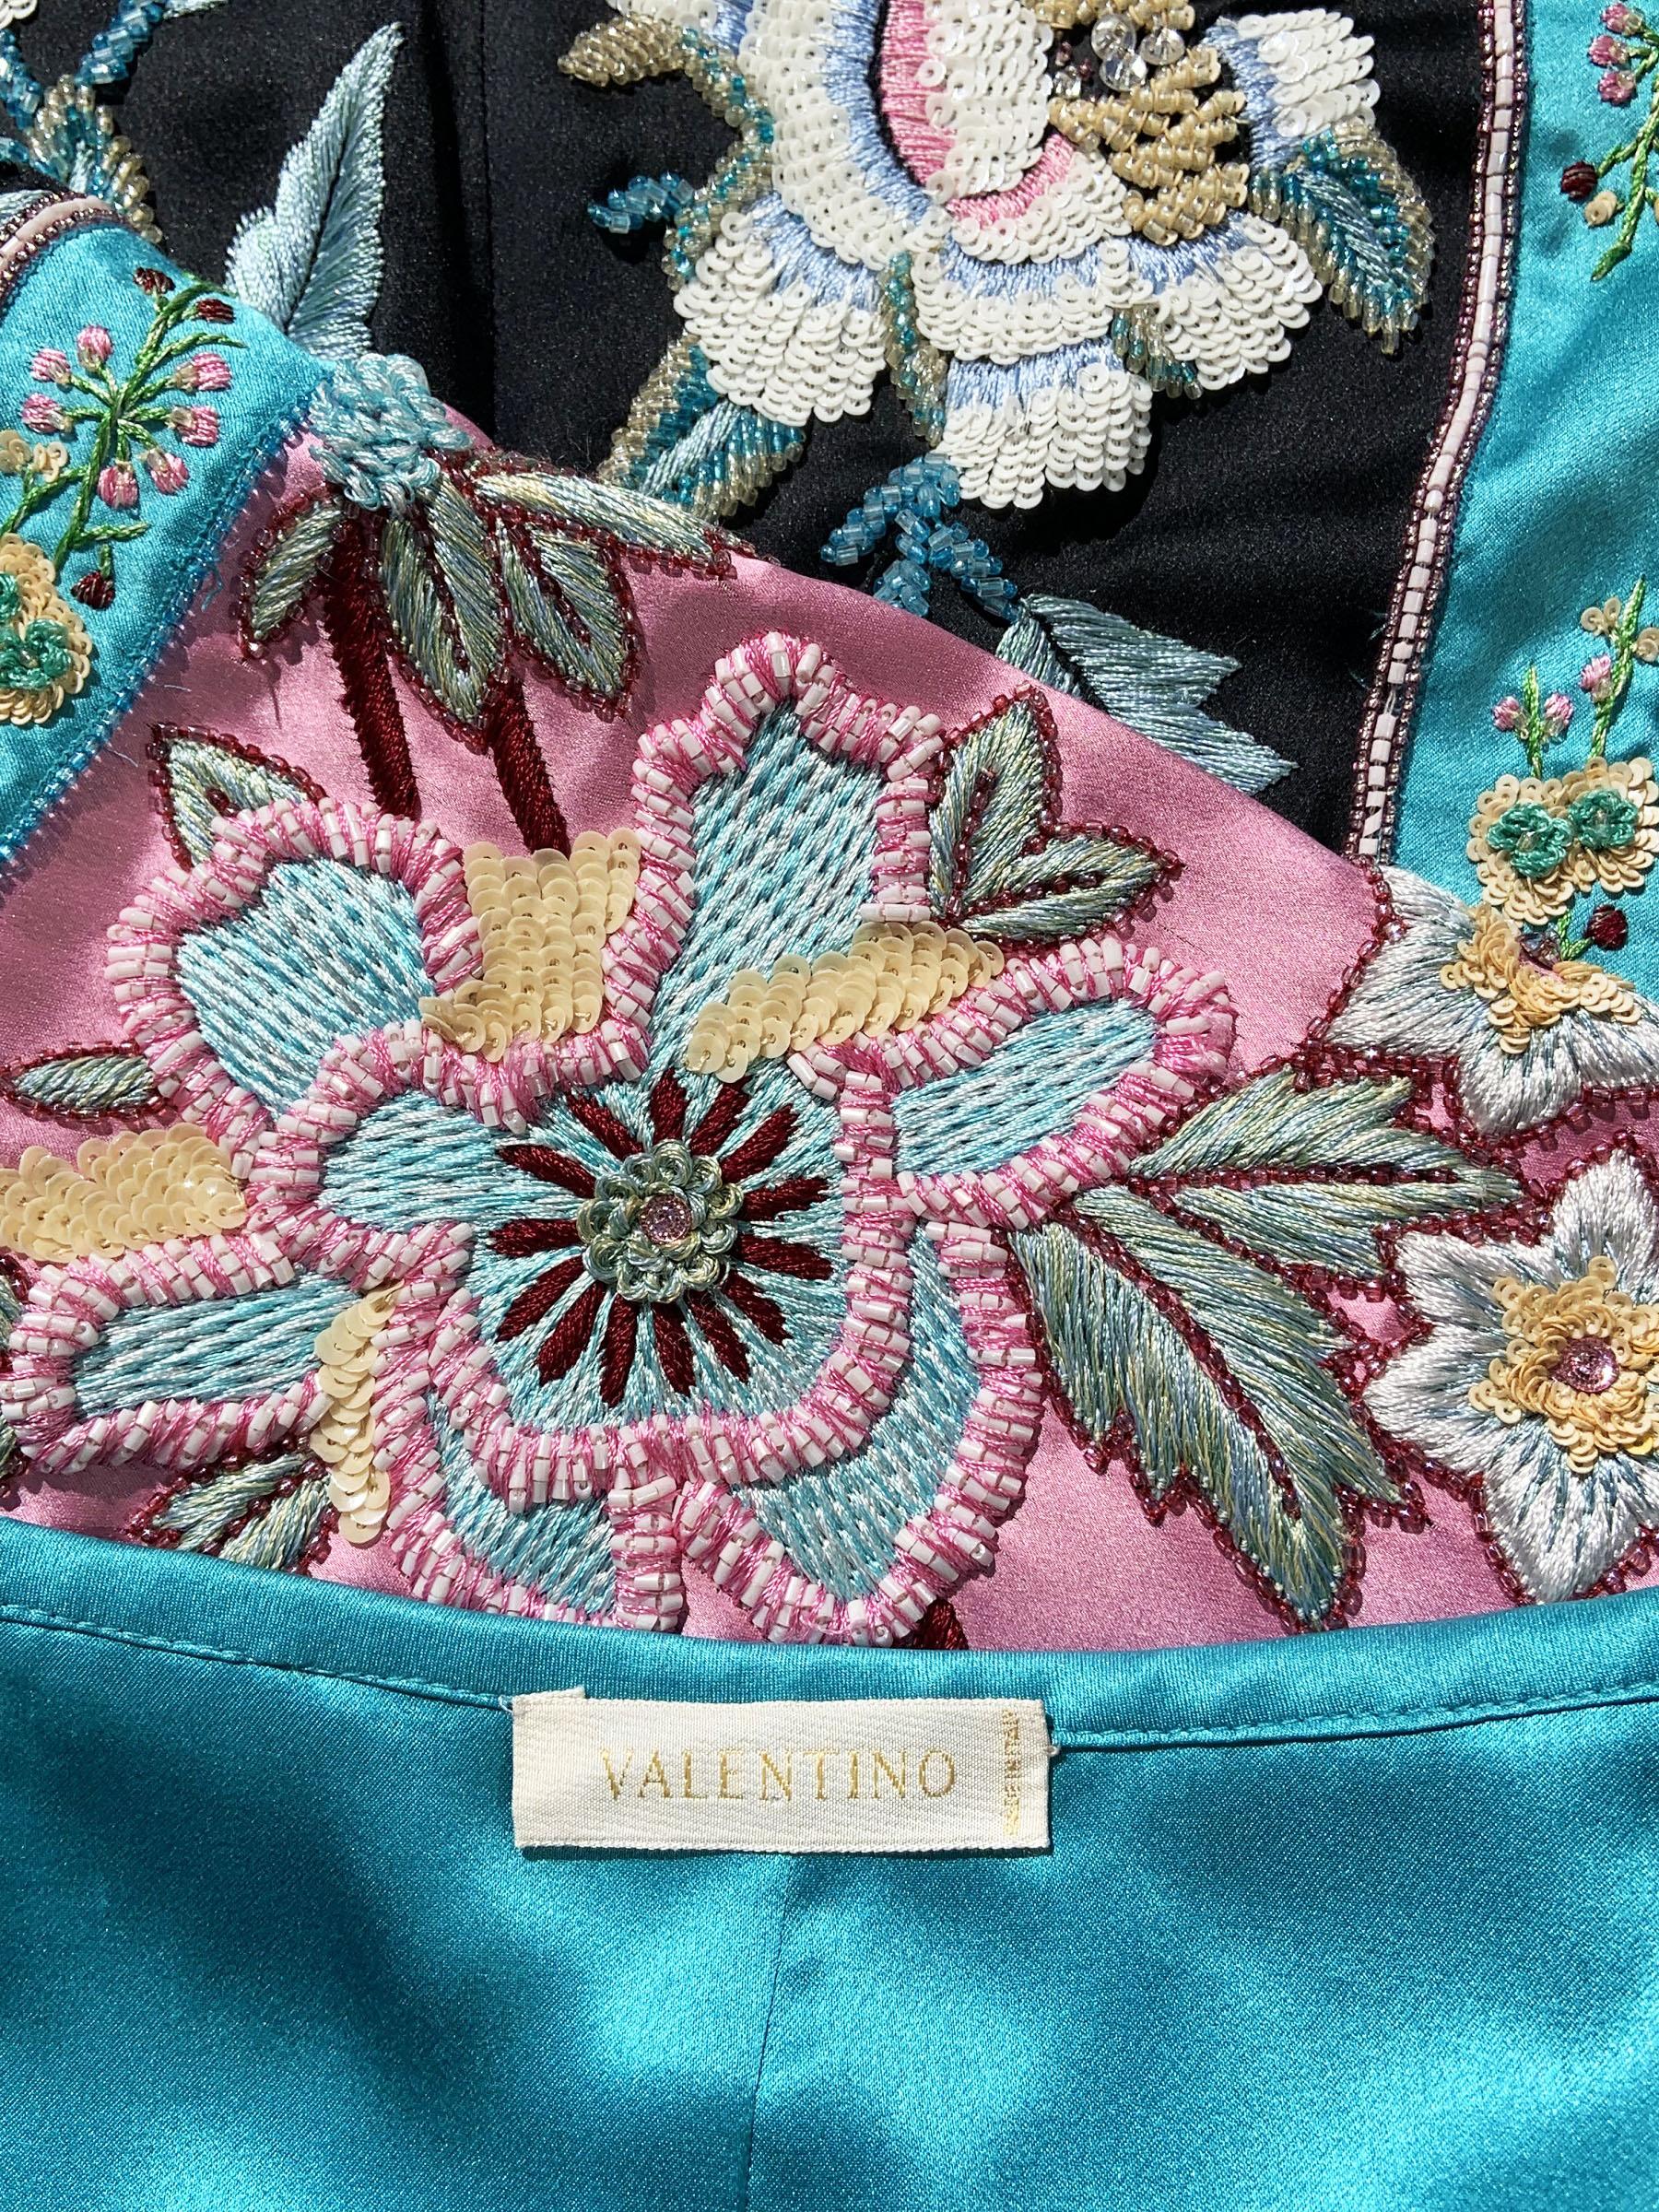 Valentino S/S 2006 Runway Silk Fully Beaded & Embroidered Jacket Blazer size 4 For Sale 6